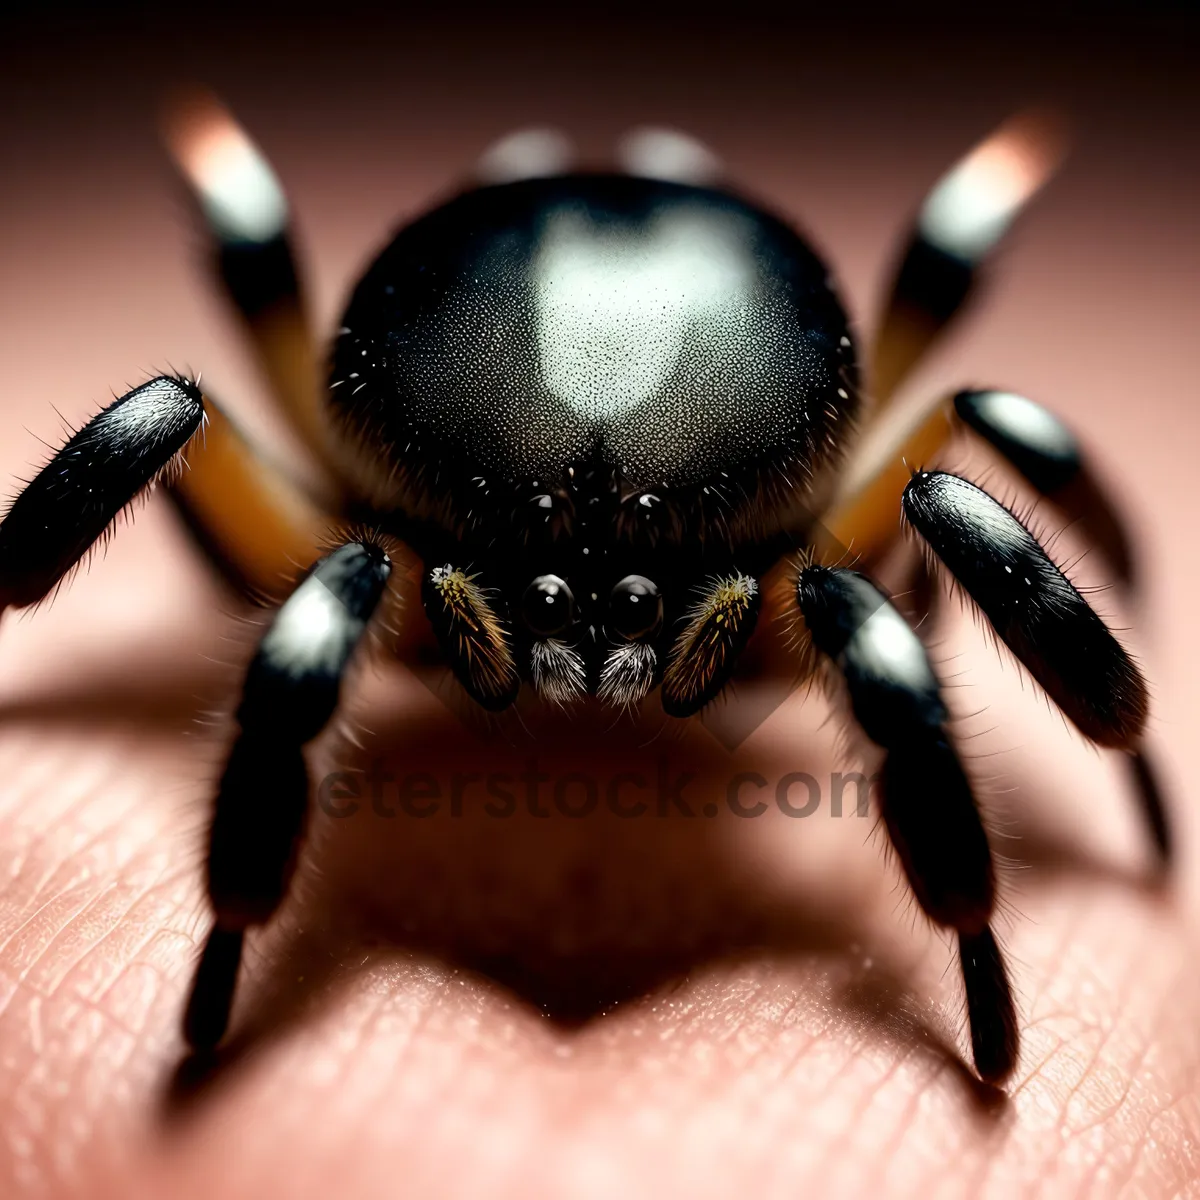 Picture of Creepy Crawlers: A Close-Up of a Poisonous Black Spider